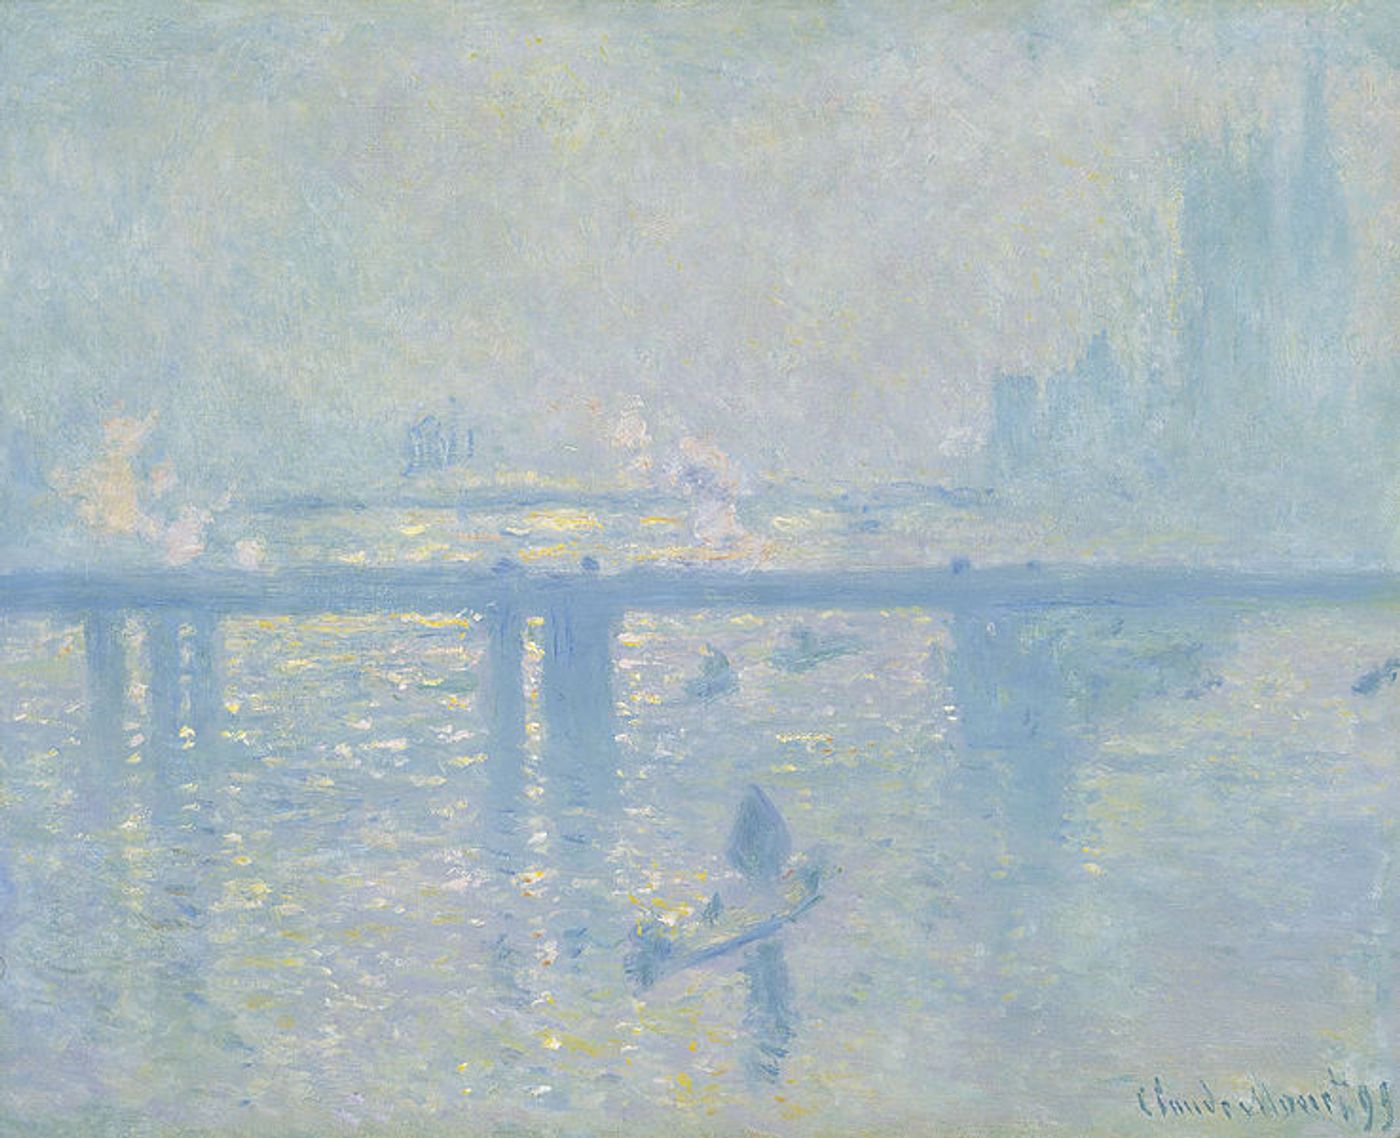 Monet's Charing Cross Bridge (1899). (This work is in the US Public Domain in accordance with US copyright laws)